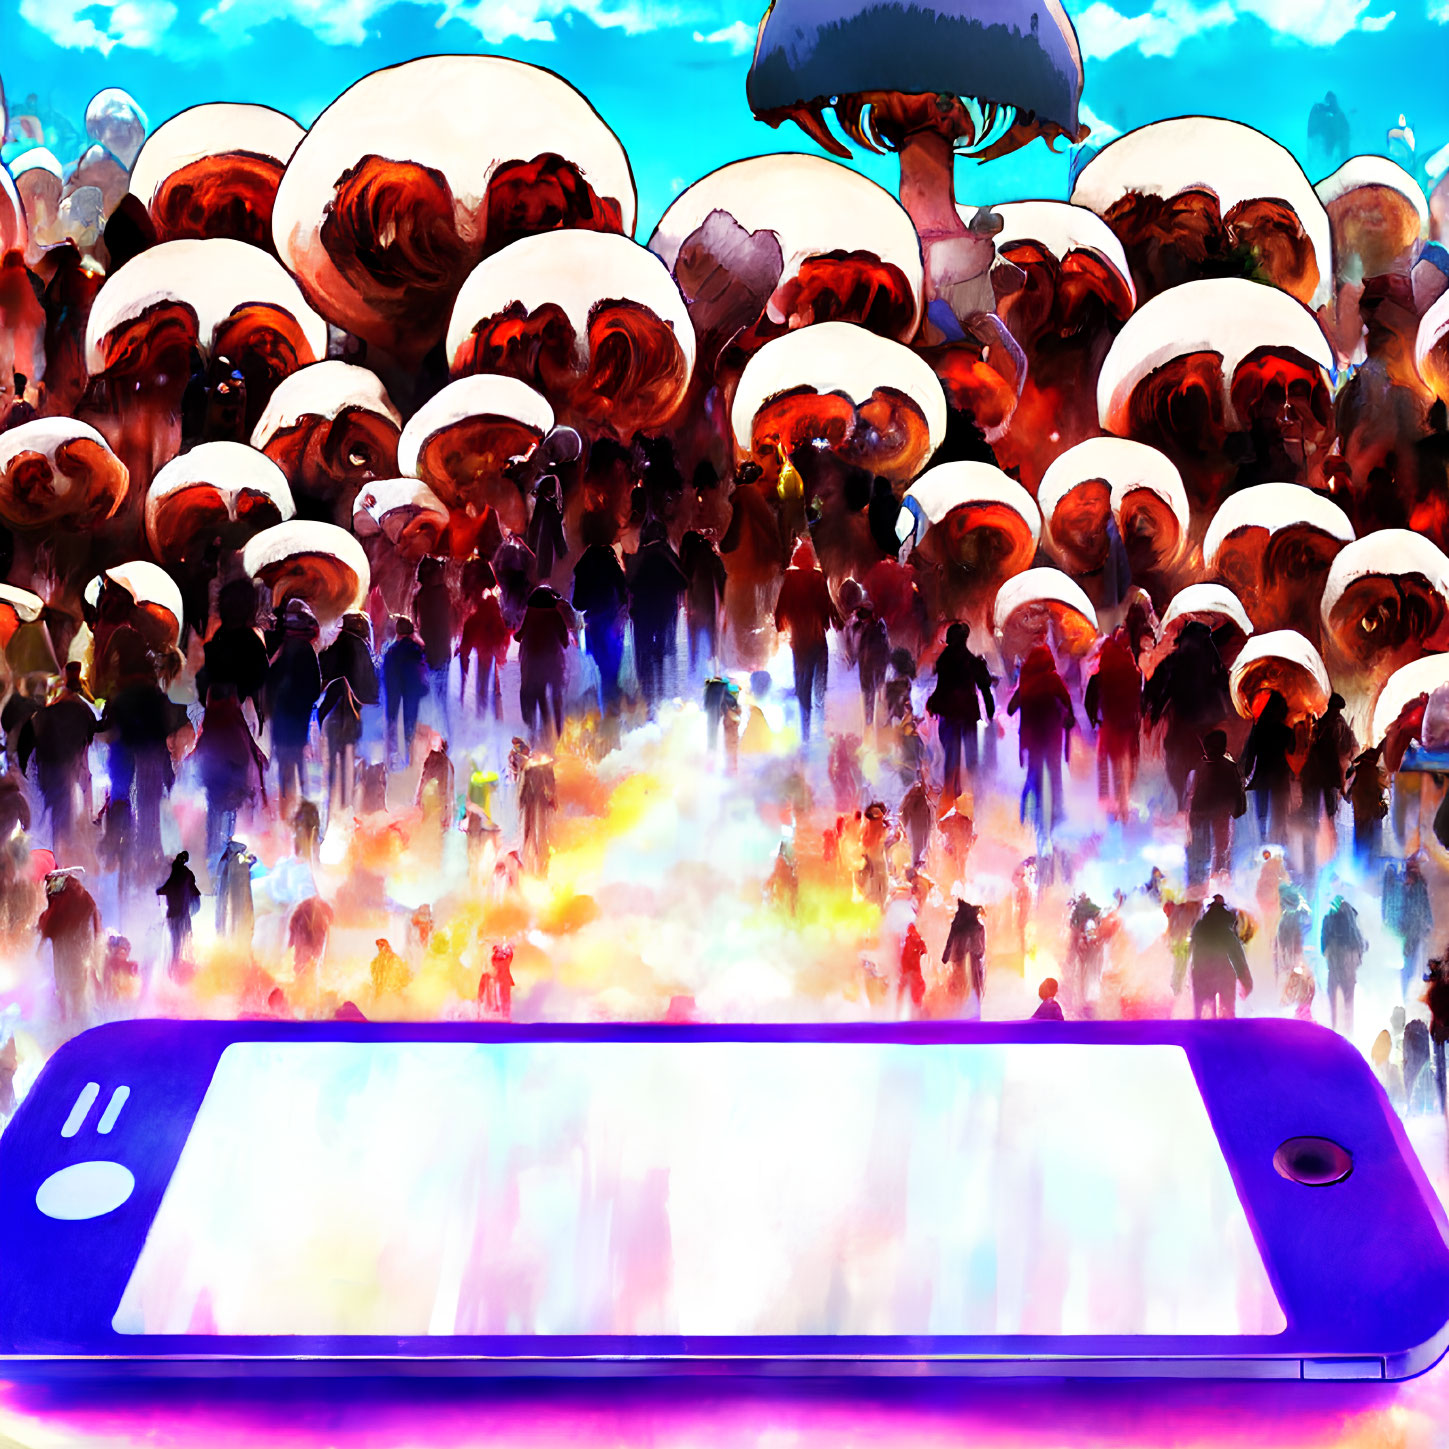 Colorful silhouettes and mushroom clouds behind a smartphone in surreal setting